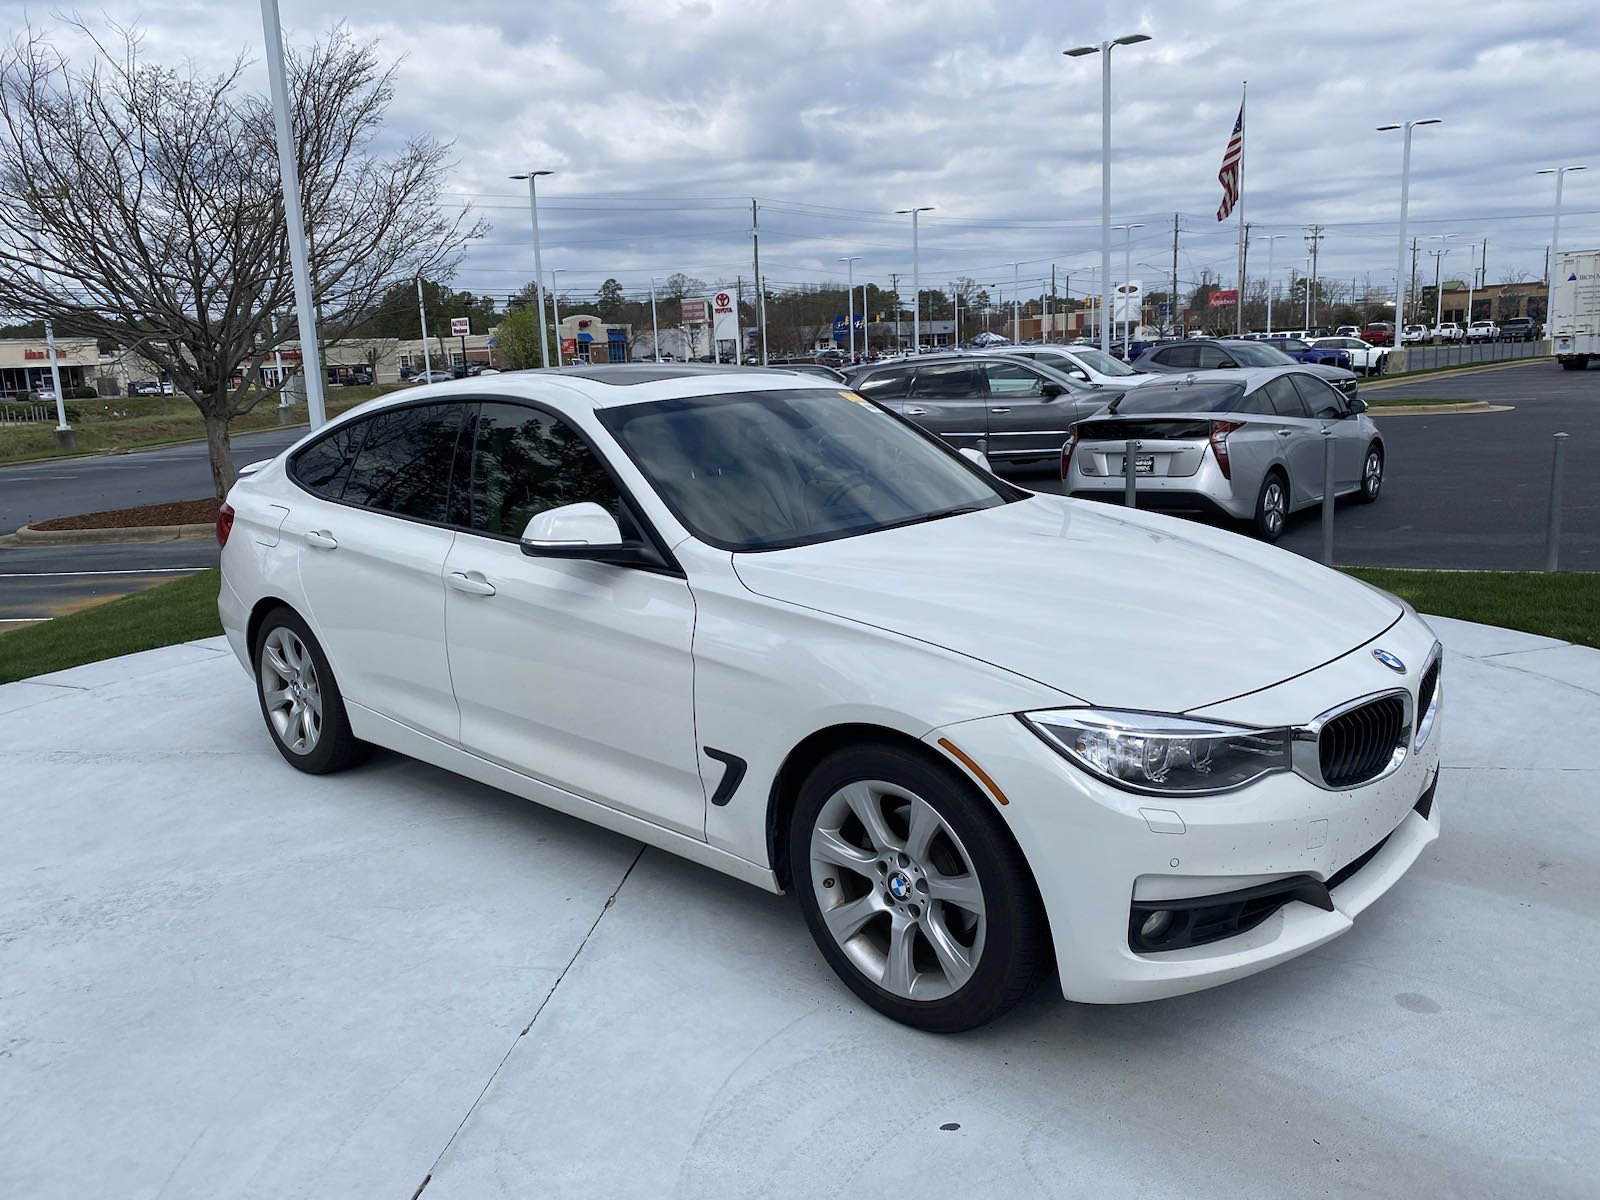 Pre-Owned 2015 BMW 3 Series Gran Turismo 328i xDrive Hatchback in  Tallahassee #Q14799A | Dale Earnhardt Jr. Chevrolet